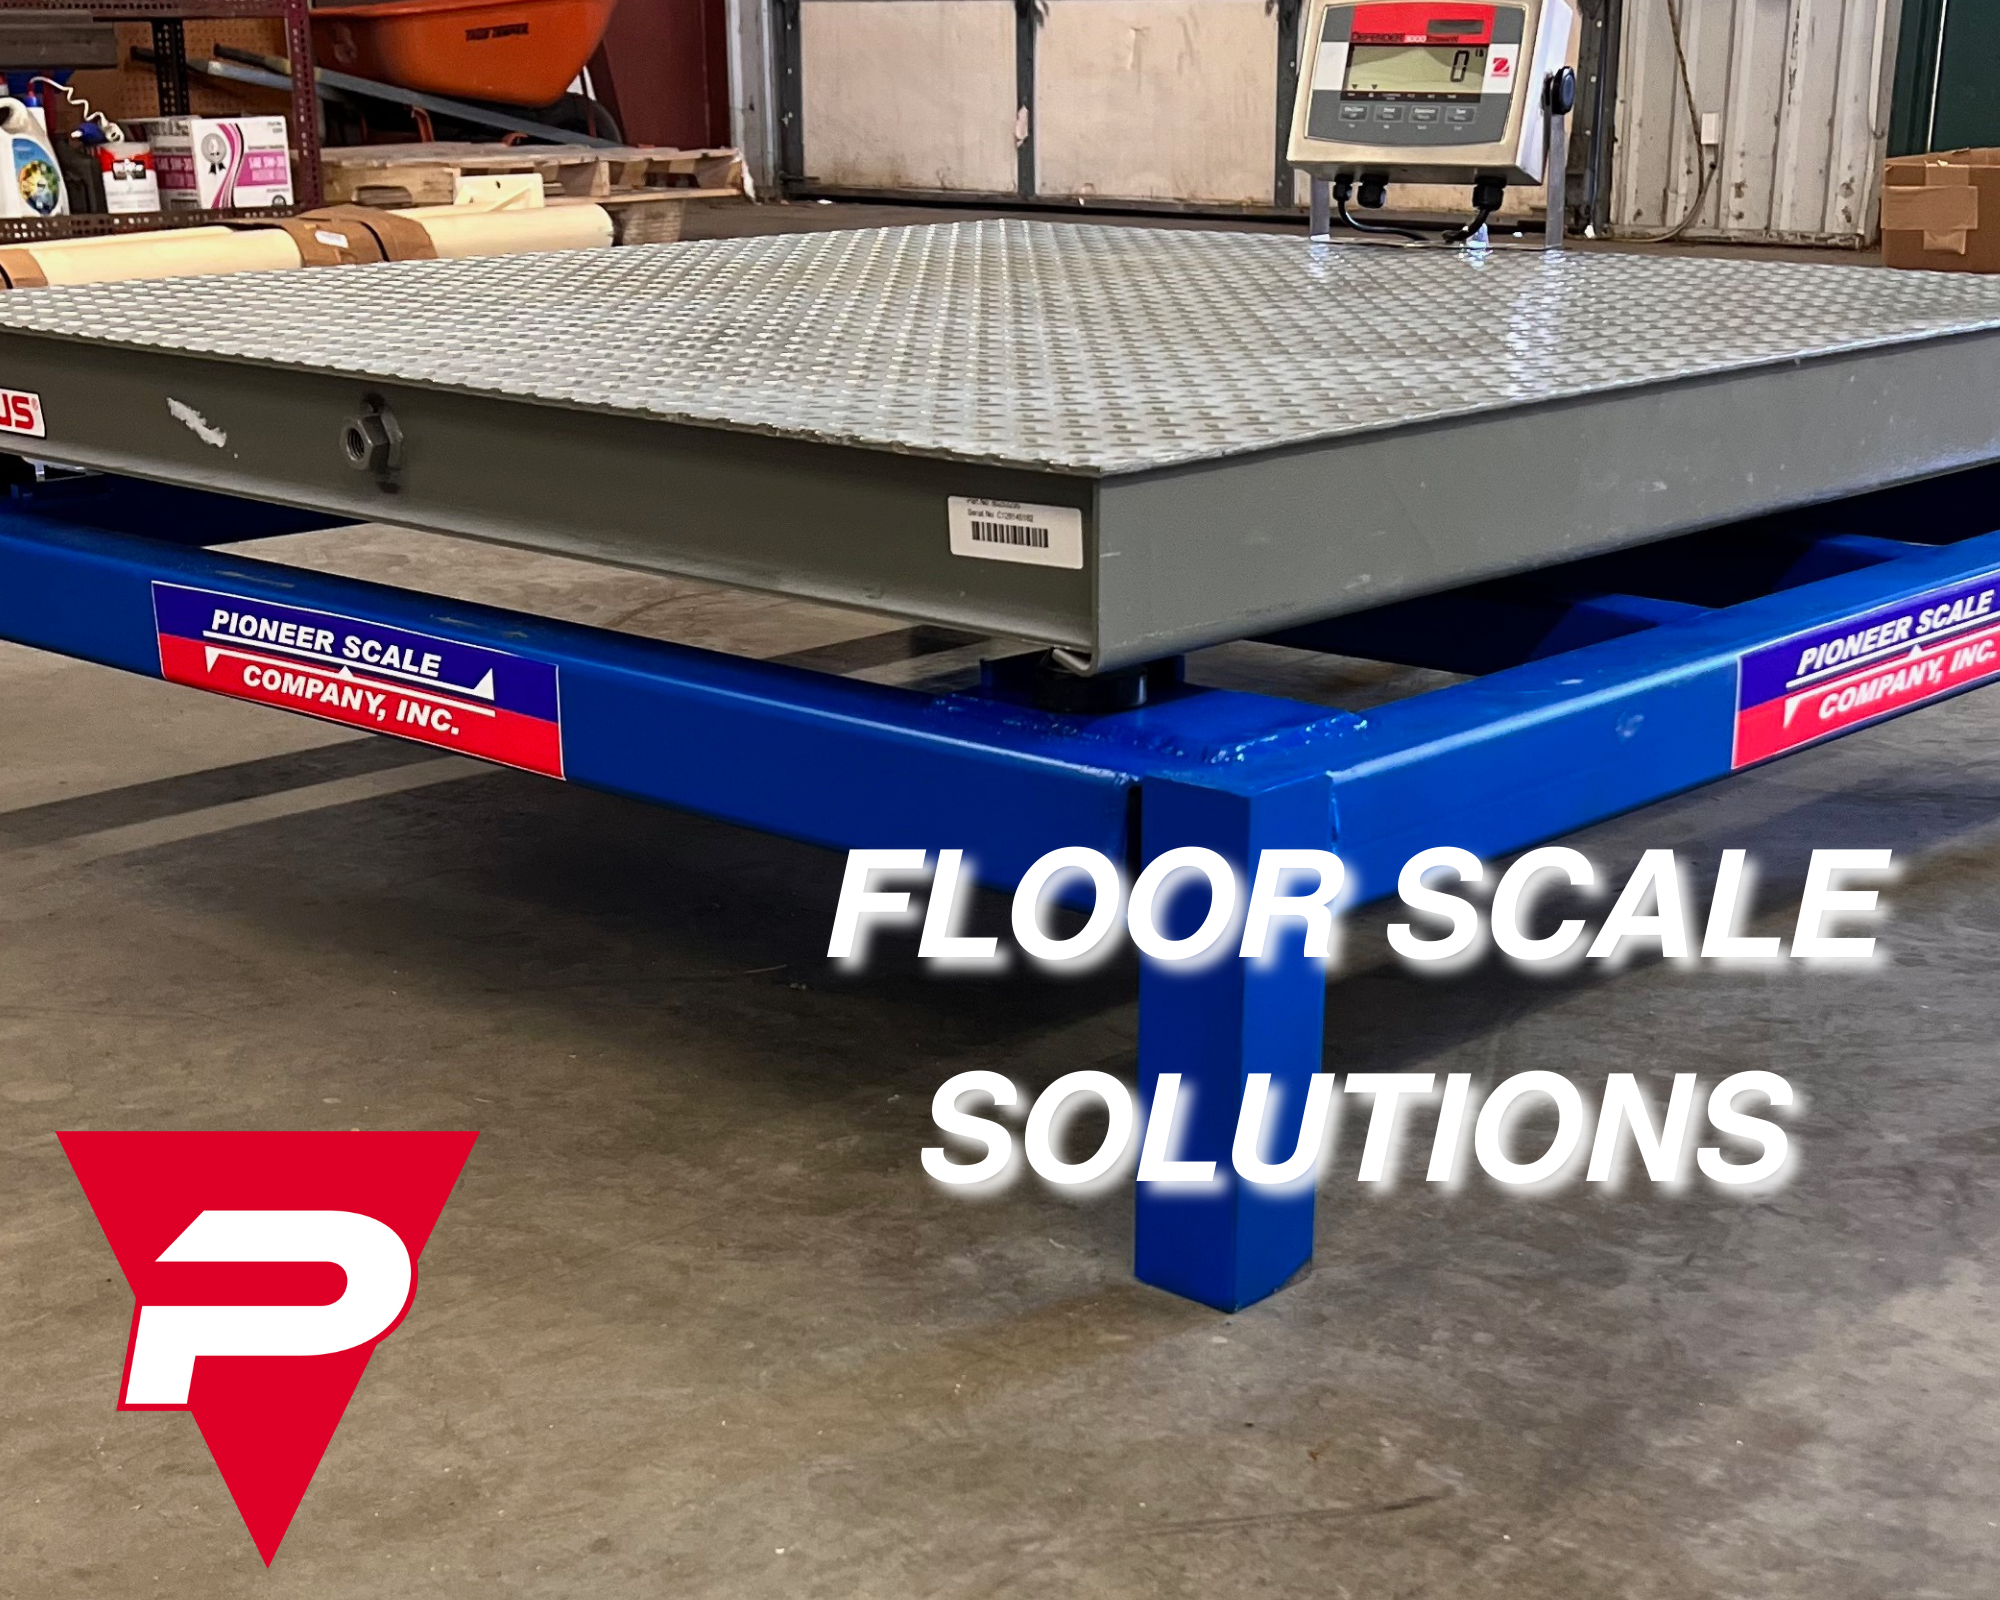 Pioneer Scale offers a wide variety of industrial-grade durable, floor scales. Pioneer Scale offers three different designs of floor scale to fit almost any weighing environment. Pioneer Scale offers a light-duty economical platform scale made for warehouses, shipping departments, and areas where heavy forklift traffic is not common. The heavy-duty platform scales fit most industrial applications we serve and are made to perform in hazardous environments.